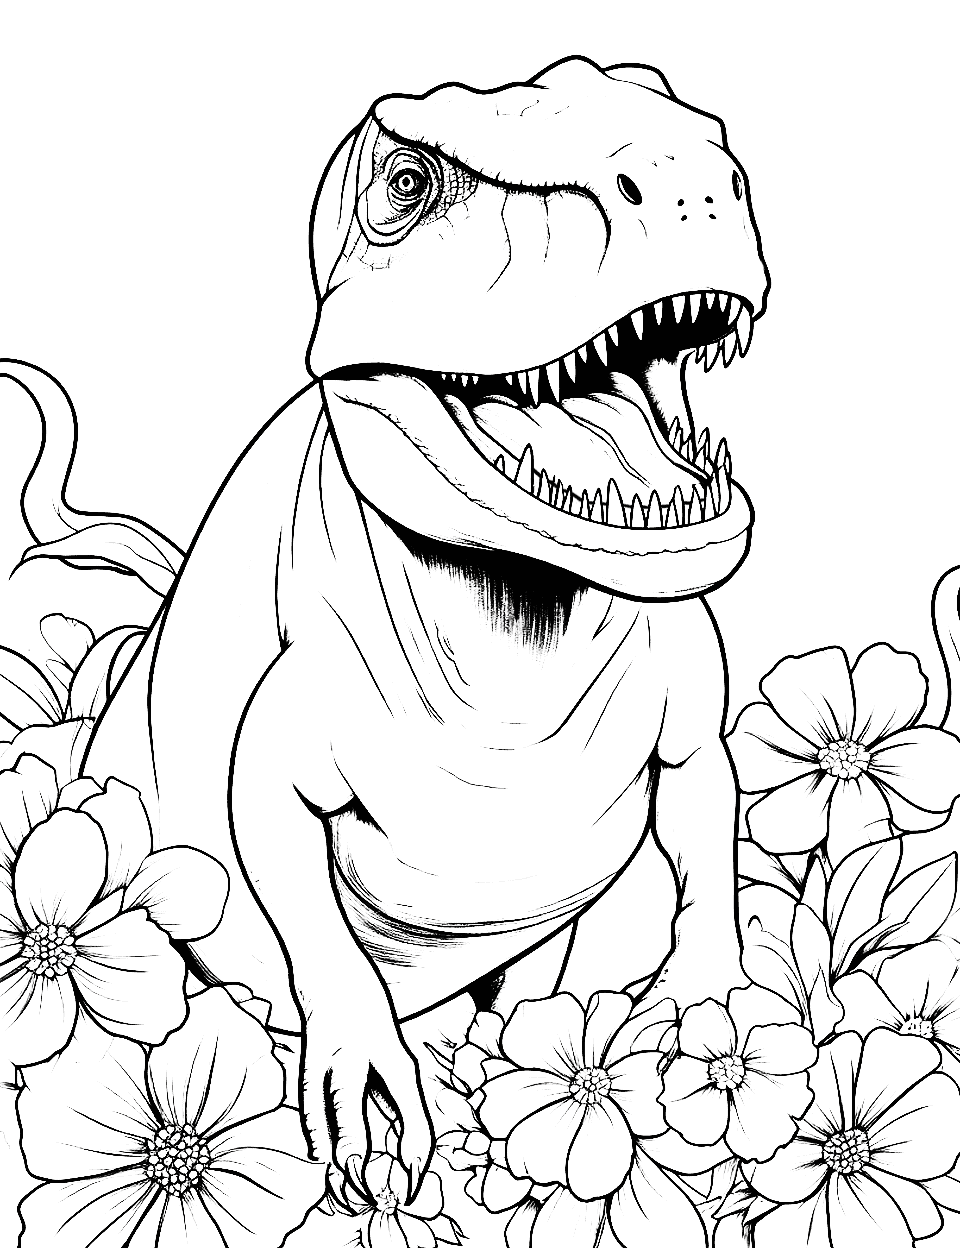 Spring Bloom T Rex T-rex Coloring Page - A T-Rex surrounded by blooming flowers.